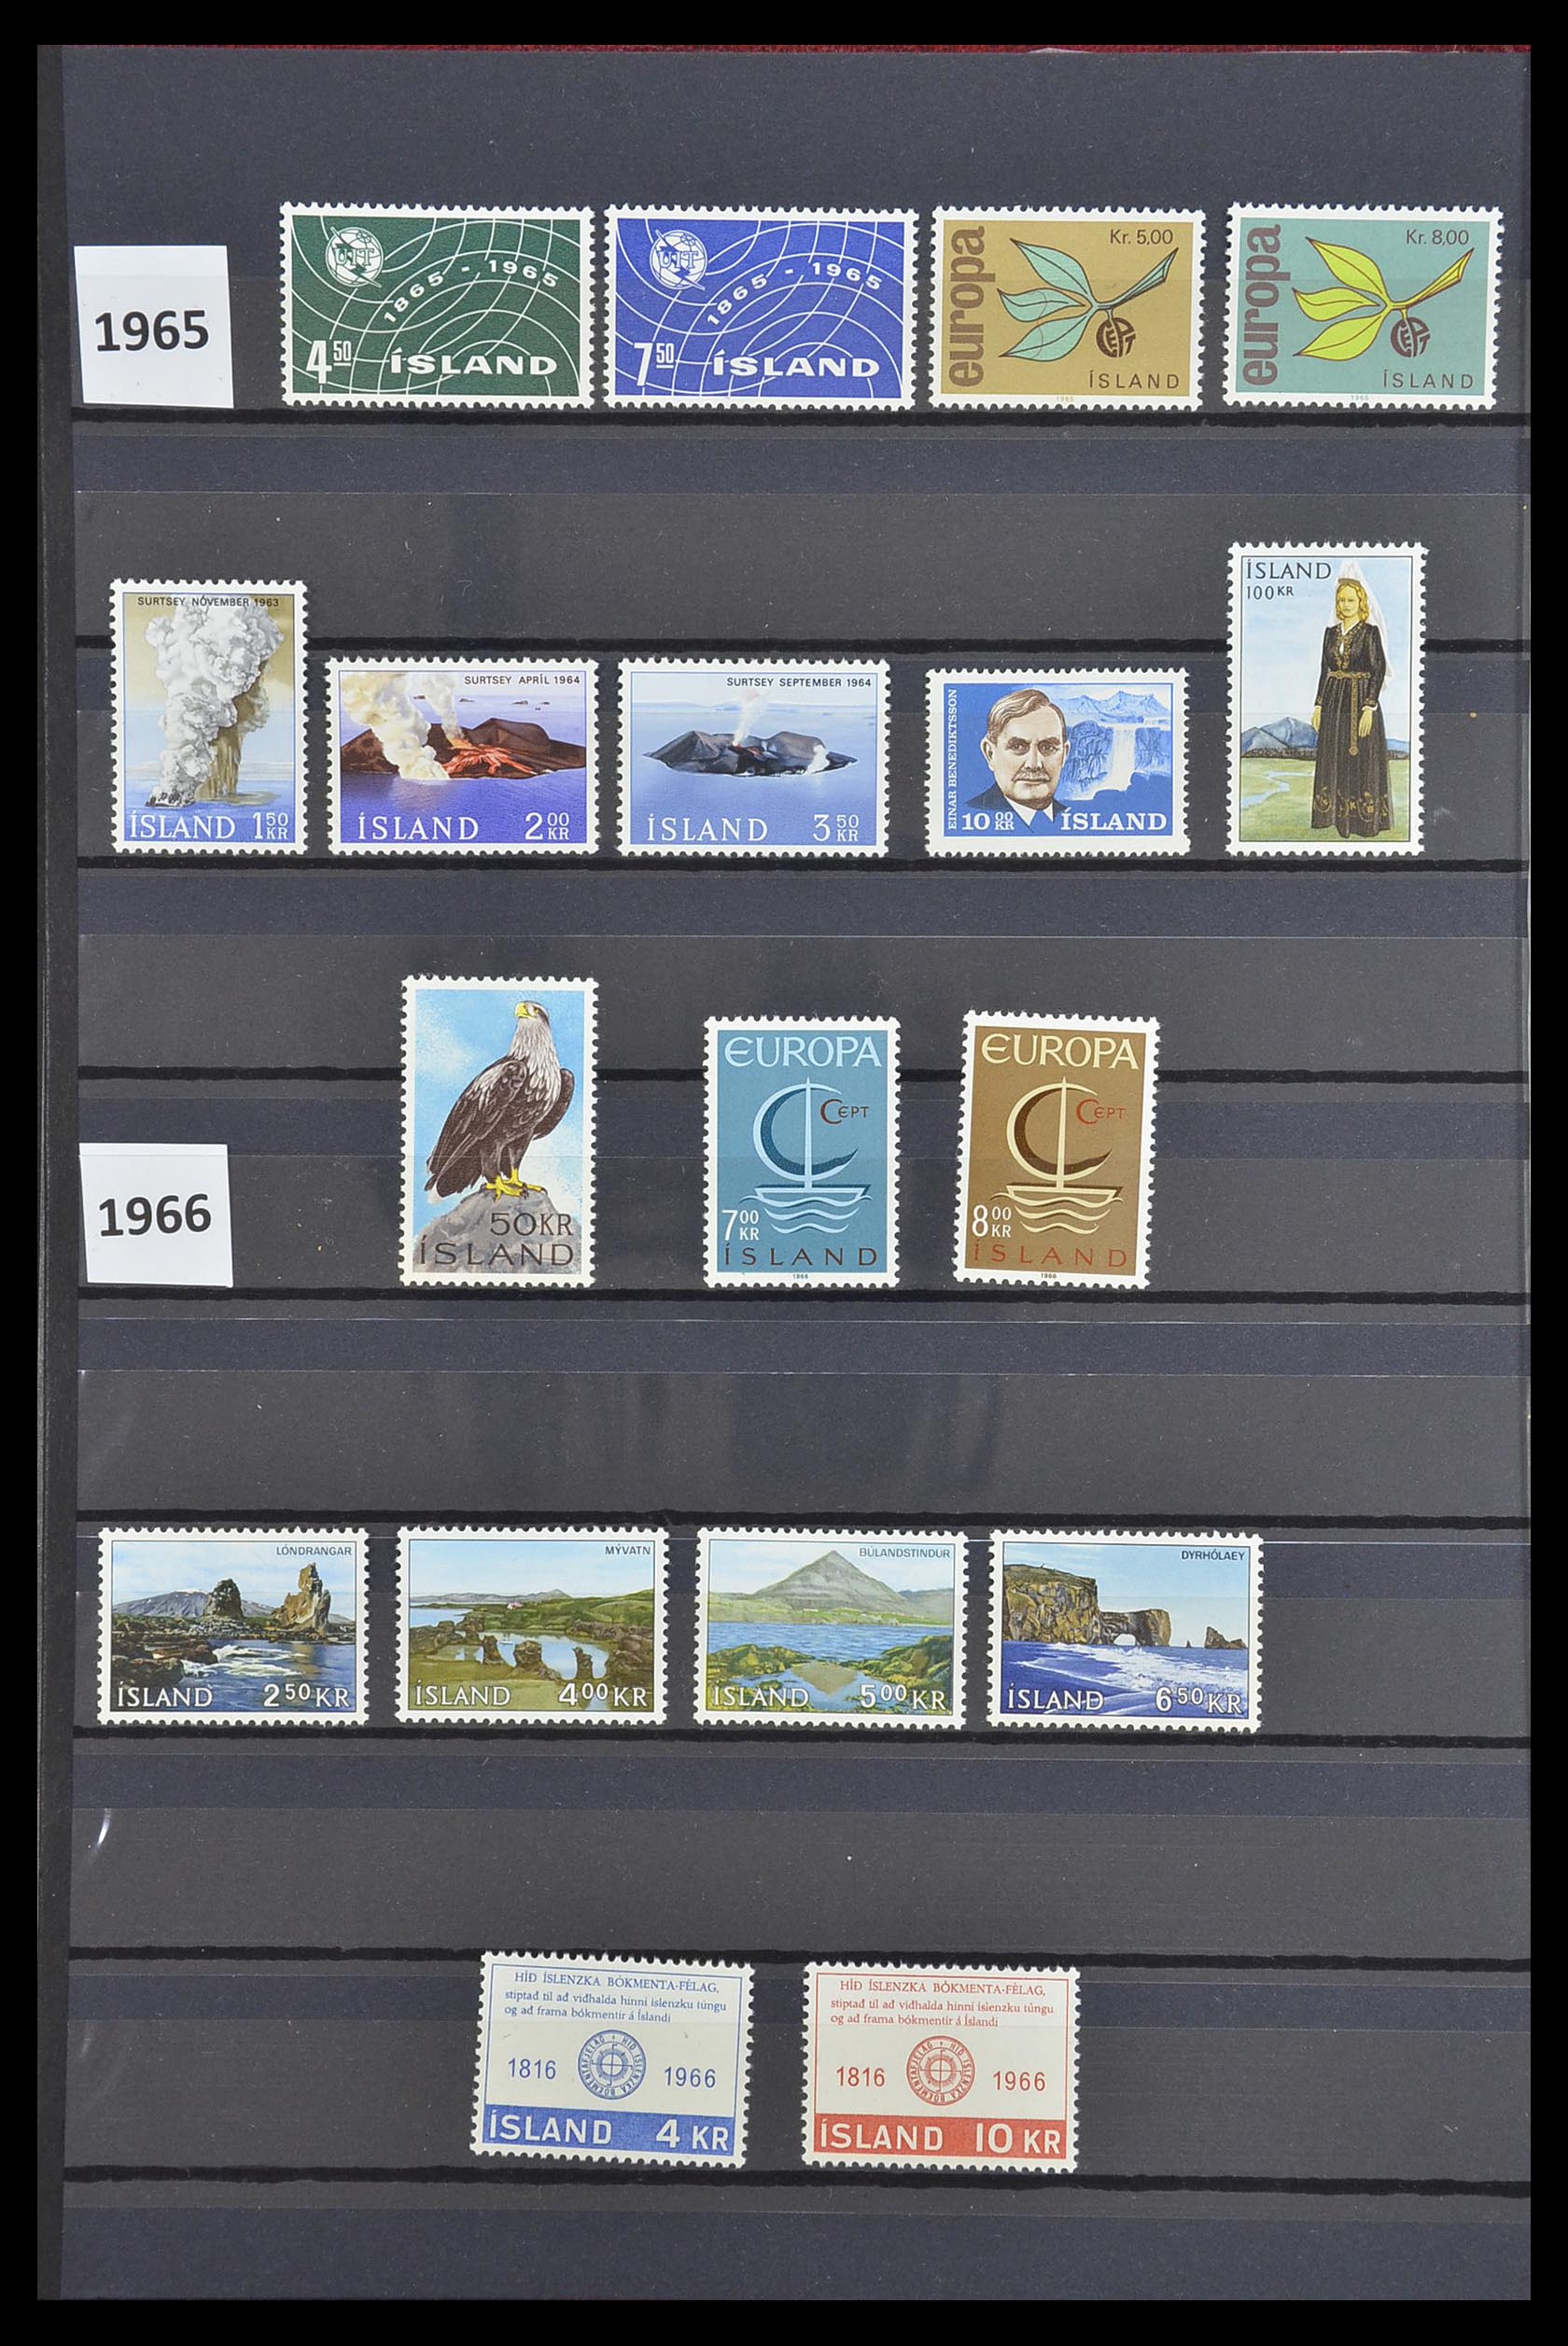 33726 093 - Stamp collection 33726 Scandinavia up to 2006.